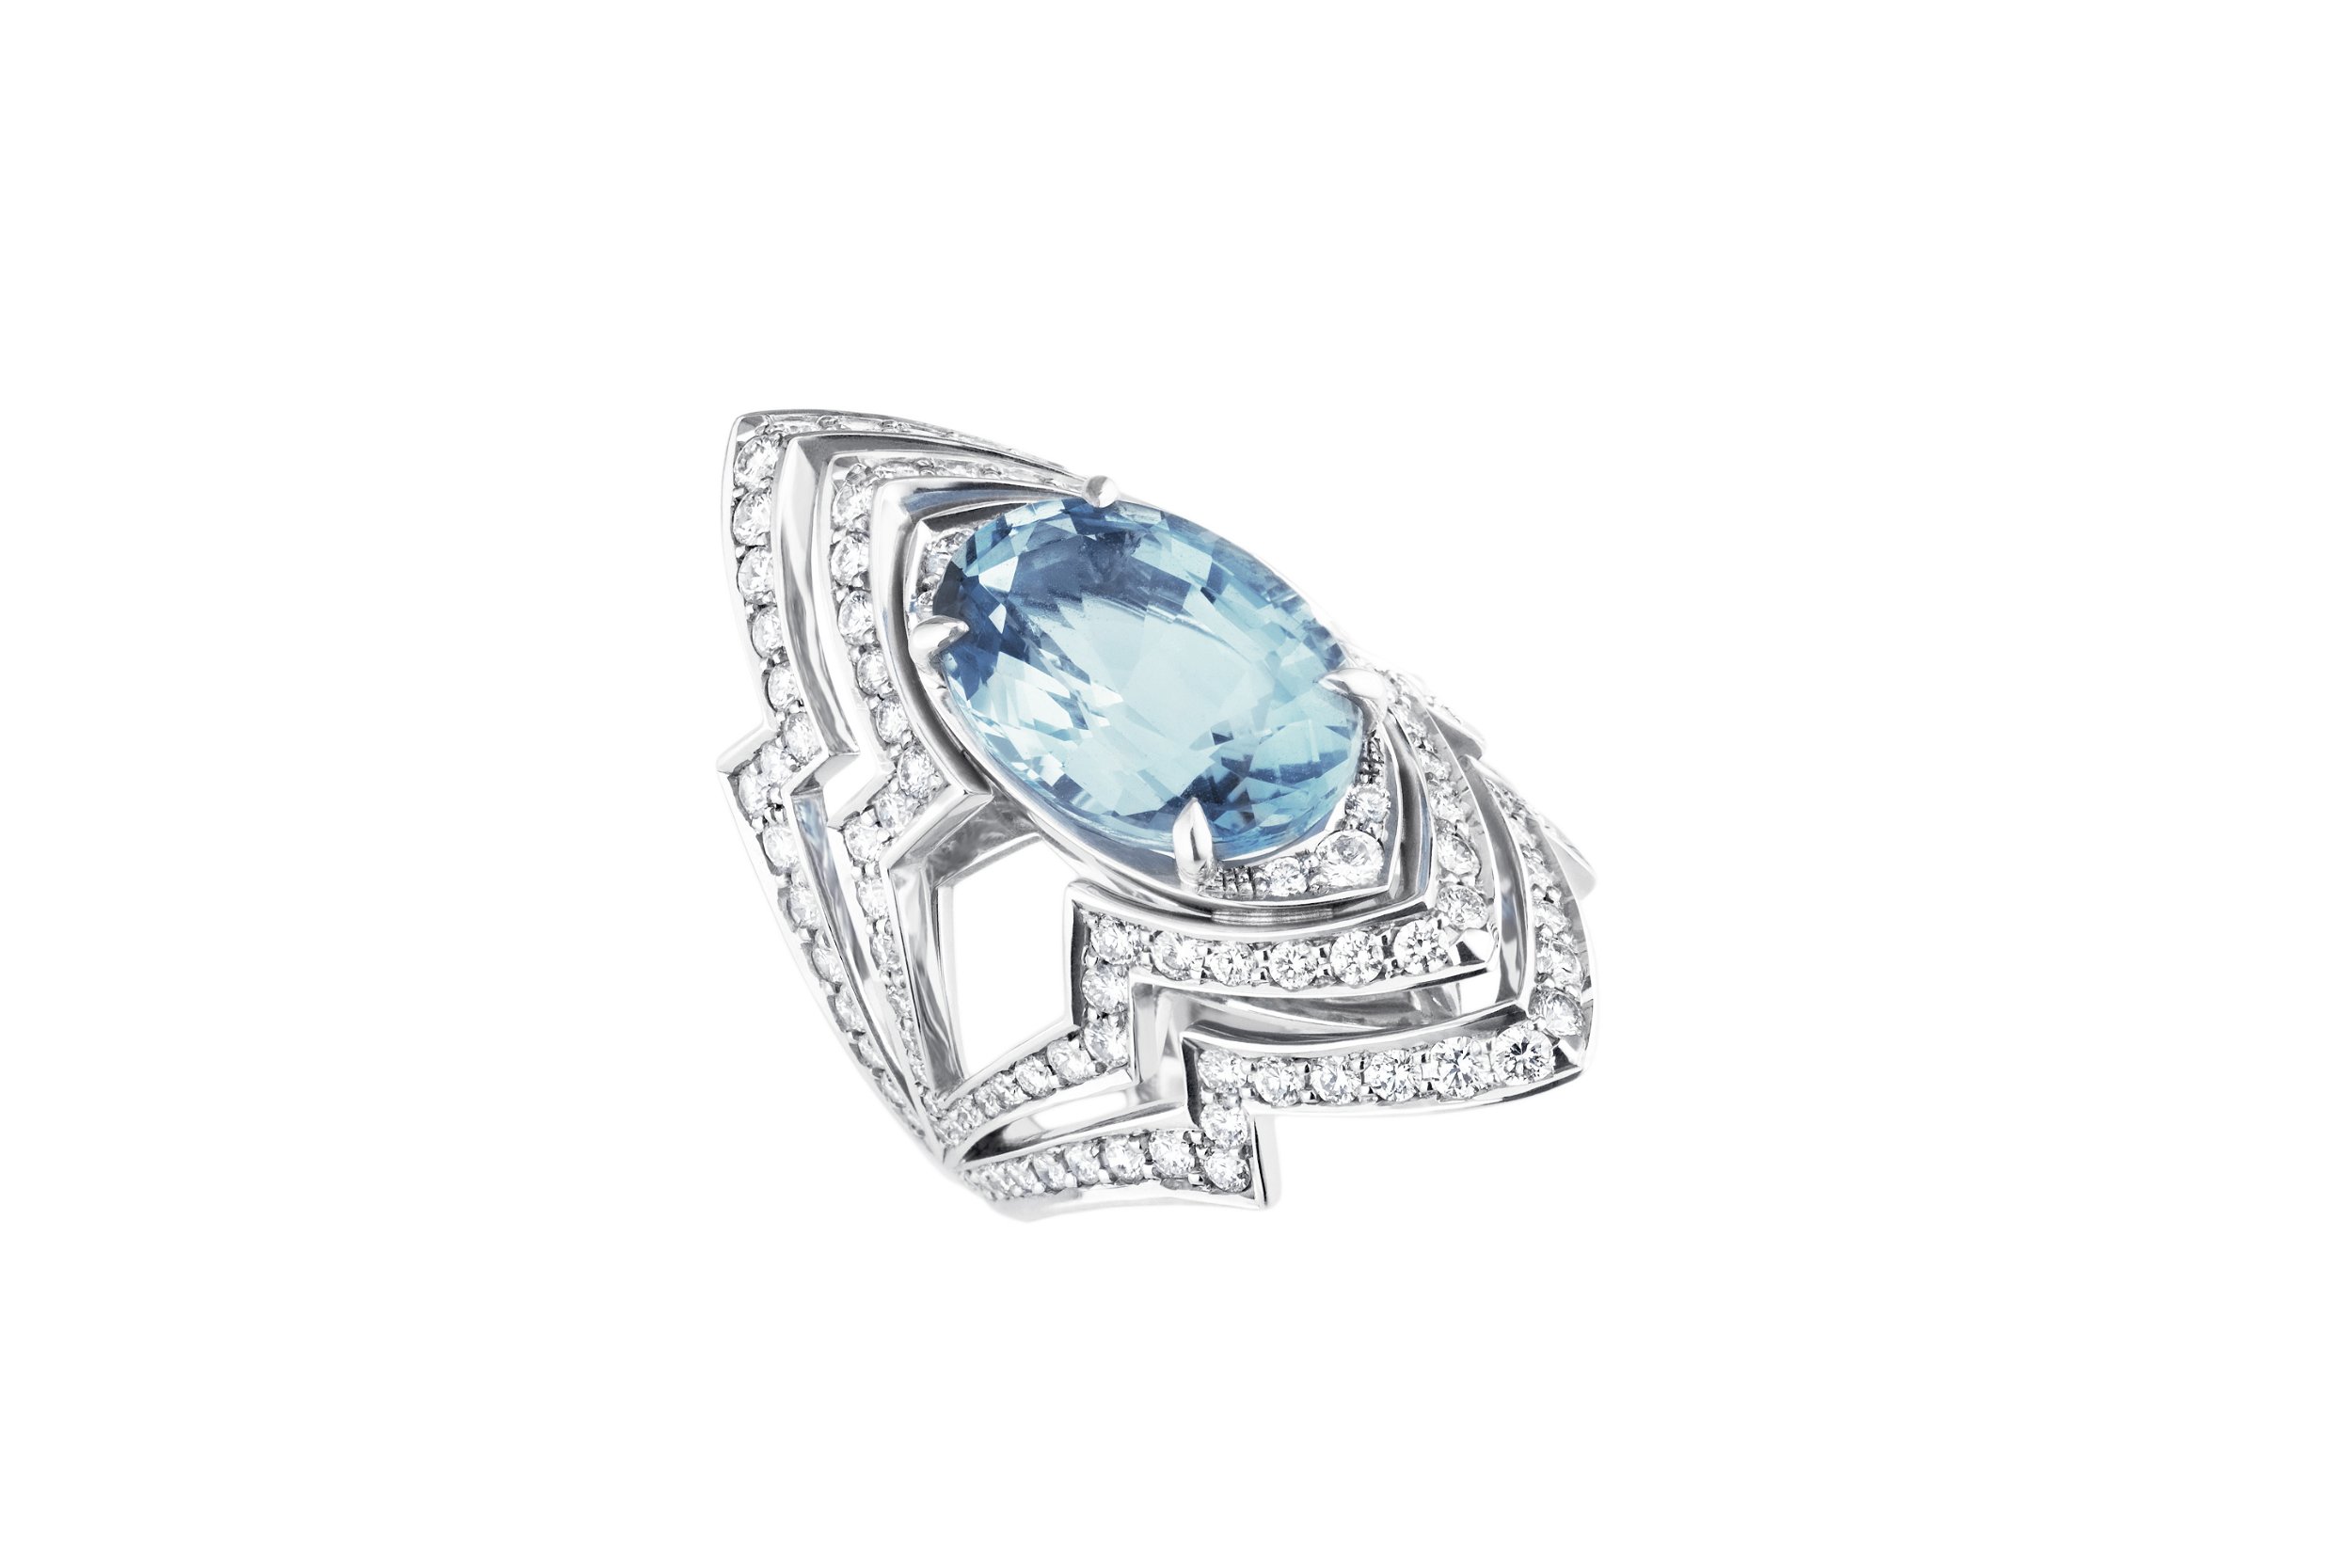 Lady Stardust Couture Ring with Aquamarine and White Diamonds in 18kt White Gold - Size 7